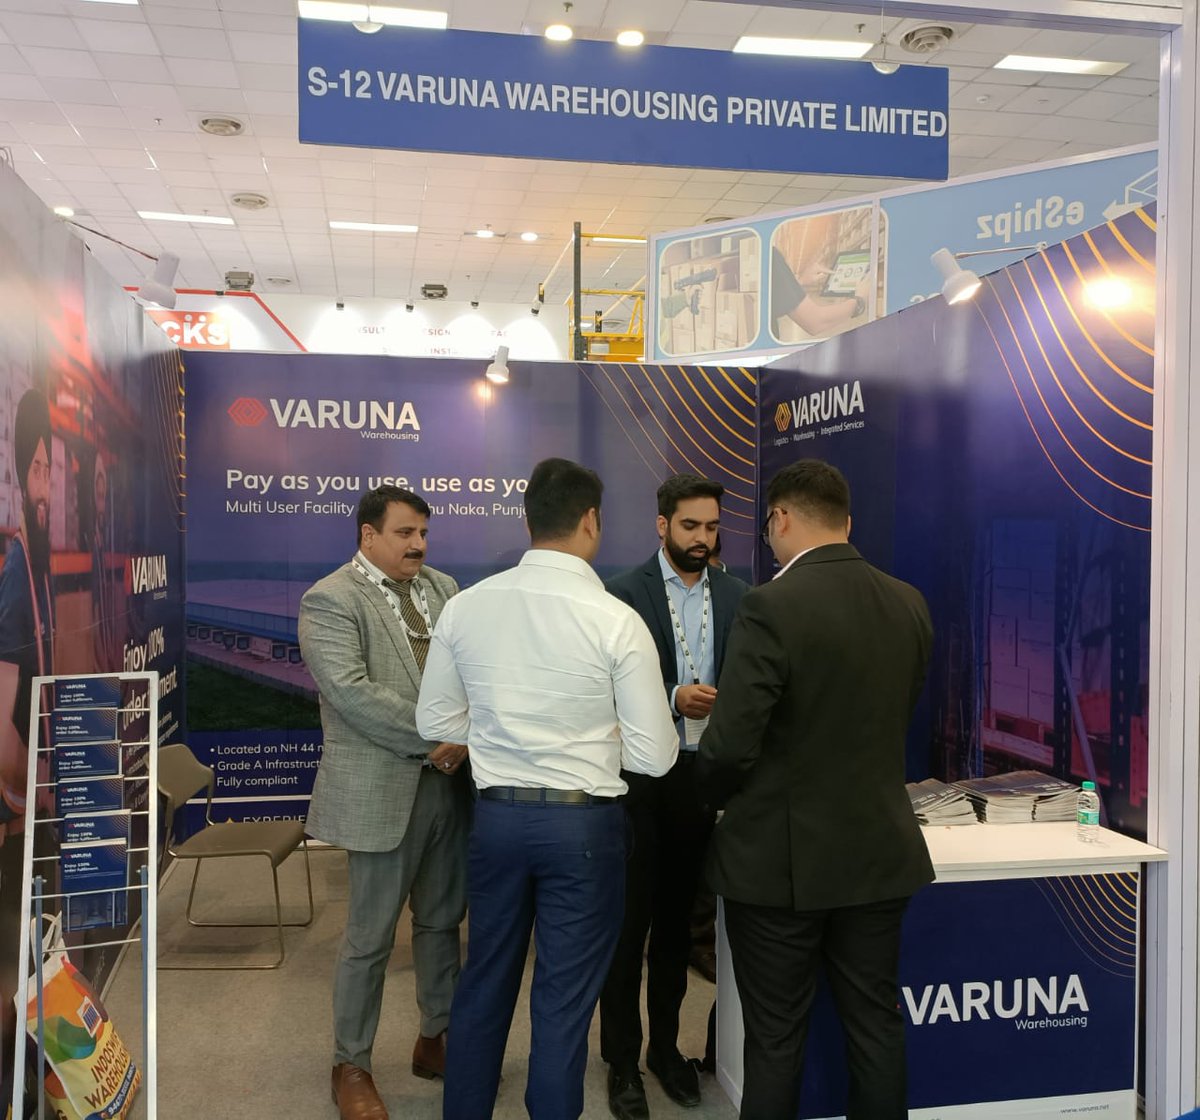 We are participating at the India Warehousing Show, Pragati Maidan from the 16-18 Dec 2021. Come visit us at Booth S-12, Hall 11.

#warehousing #india #varunagroup #varunawarehousing #supplychain #indiawarehousingshow